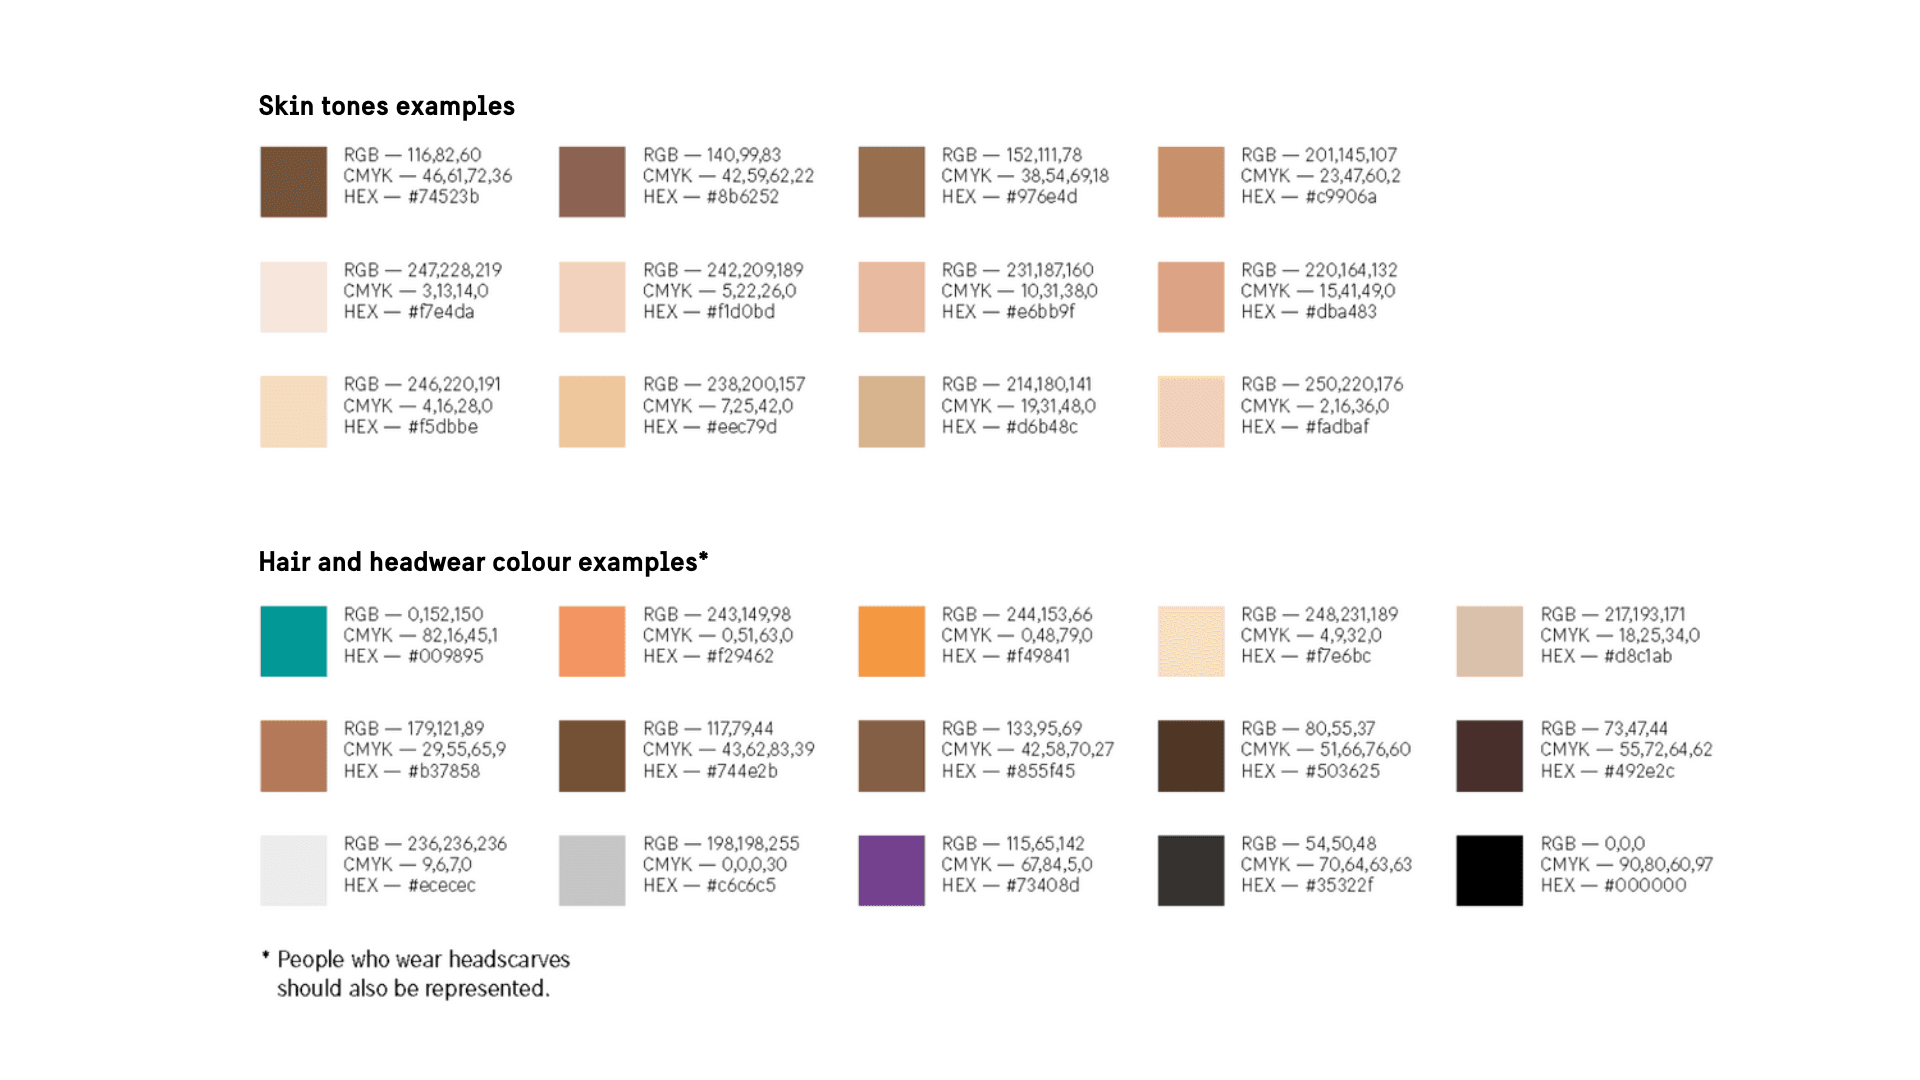 Colour examples for skin tones, as well as hair and headwear.